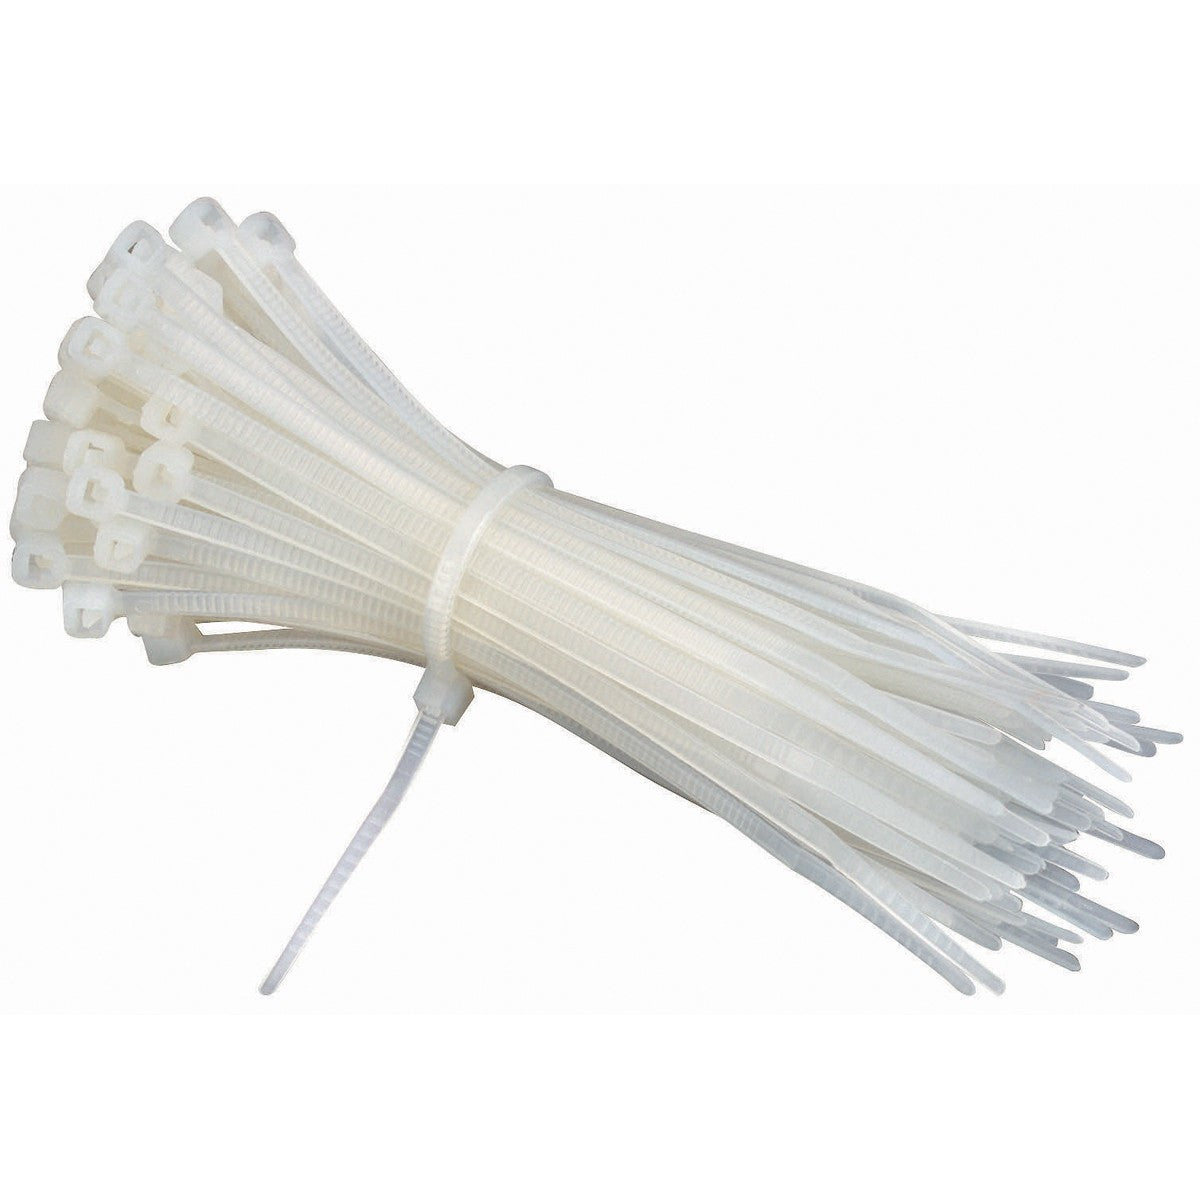 4.6 x 500mm - The Cable Tie Factory